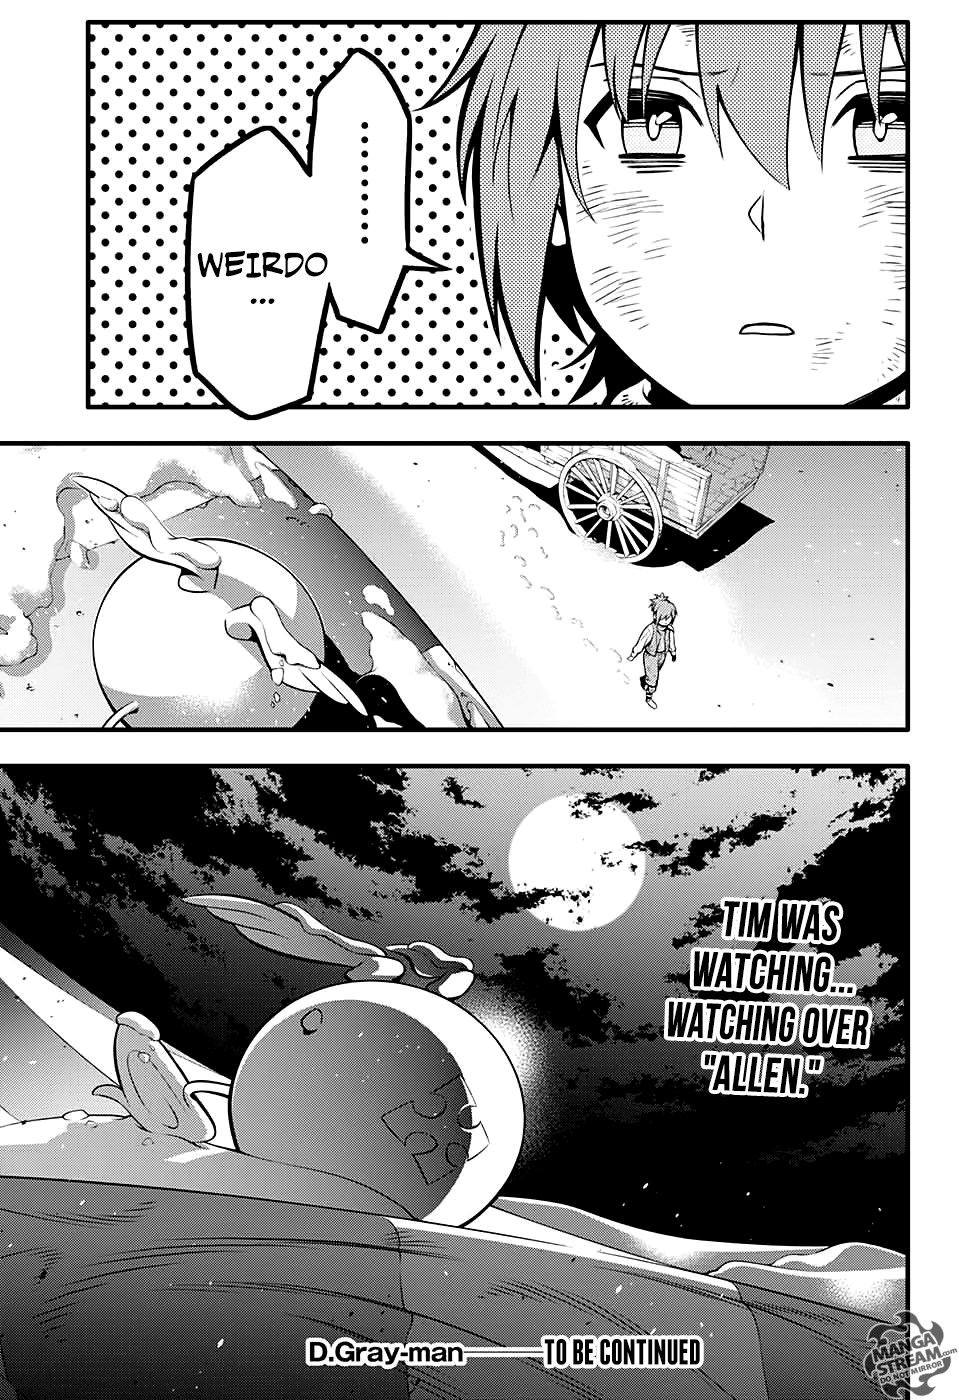 D.Gray-man chapter 232 page 35